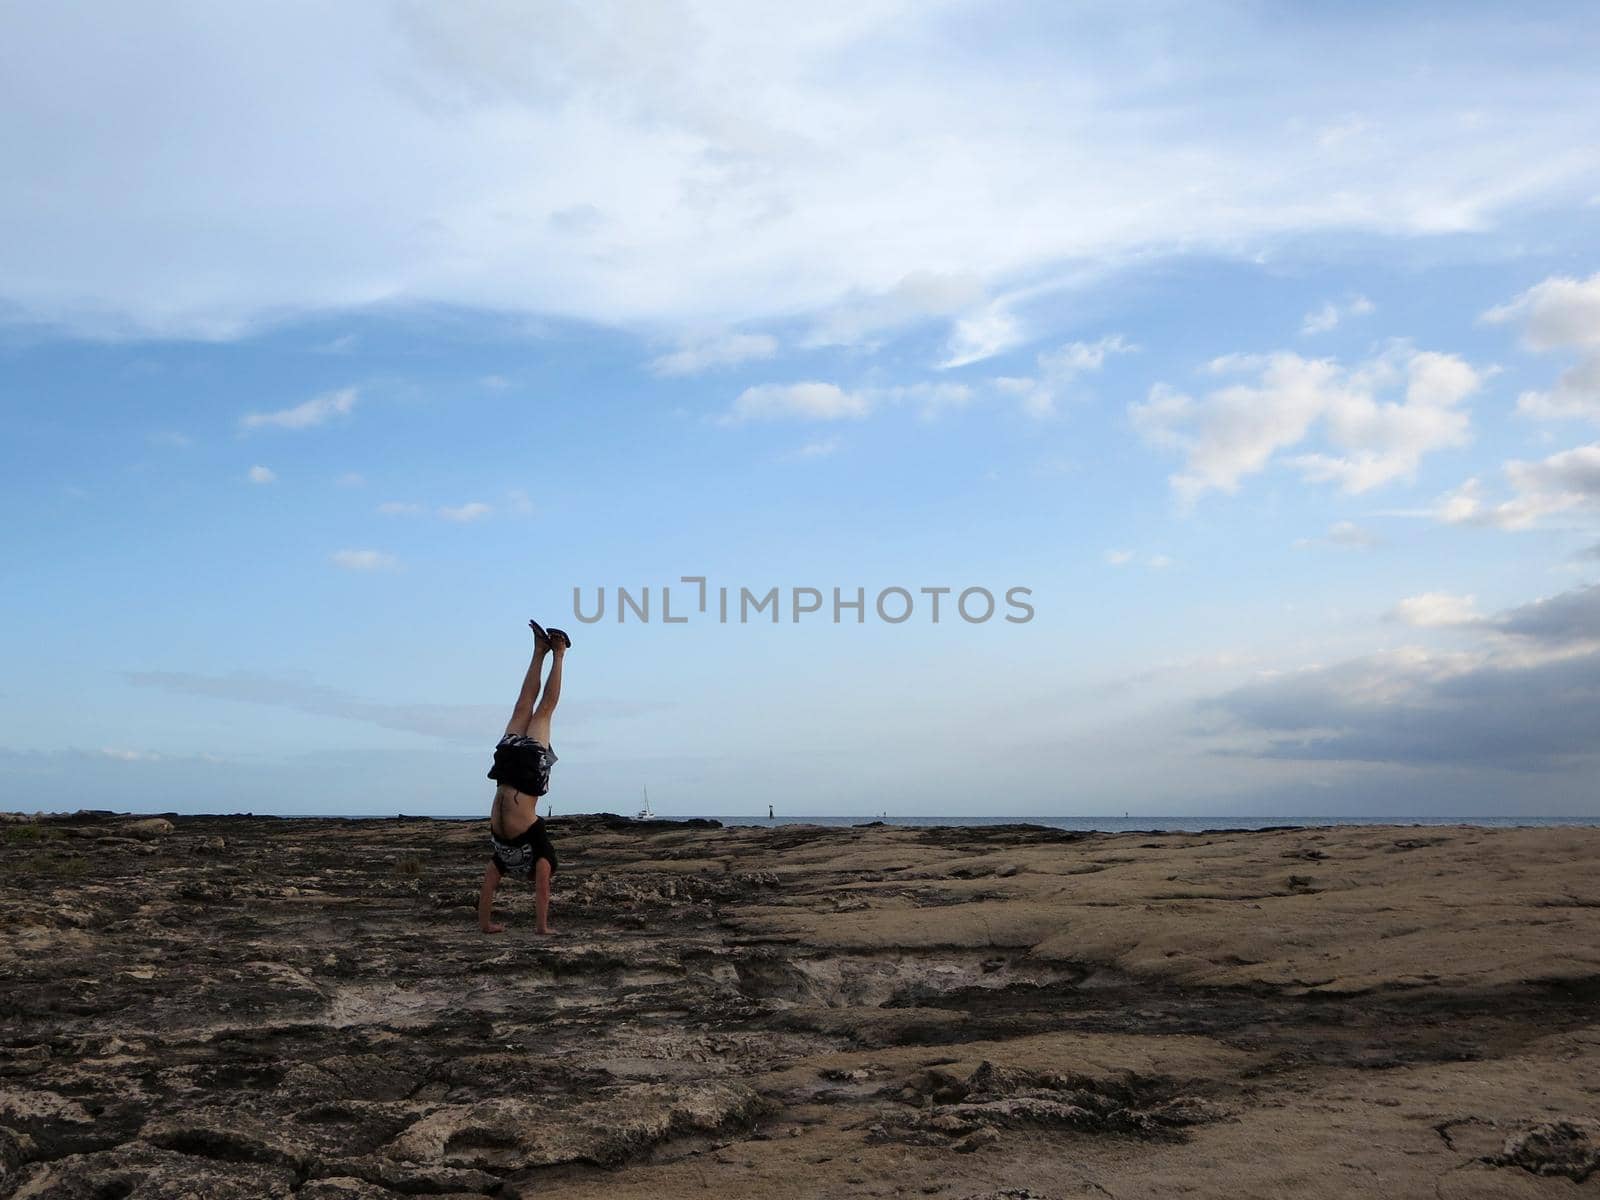 Man wearing a t-shirt, shorts, and slippers Handstands on shore rocks of Ko Olina on Oahu, Hawaii with dramatic clouds, sky, and pacific ocean in the distance. 